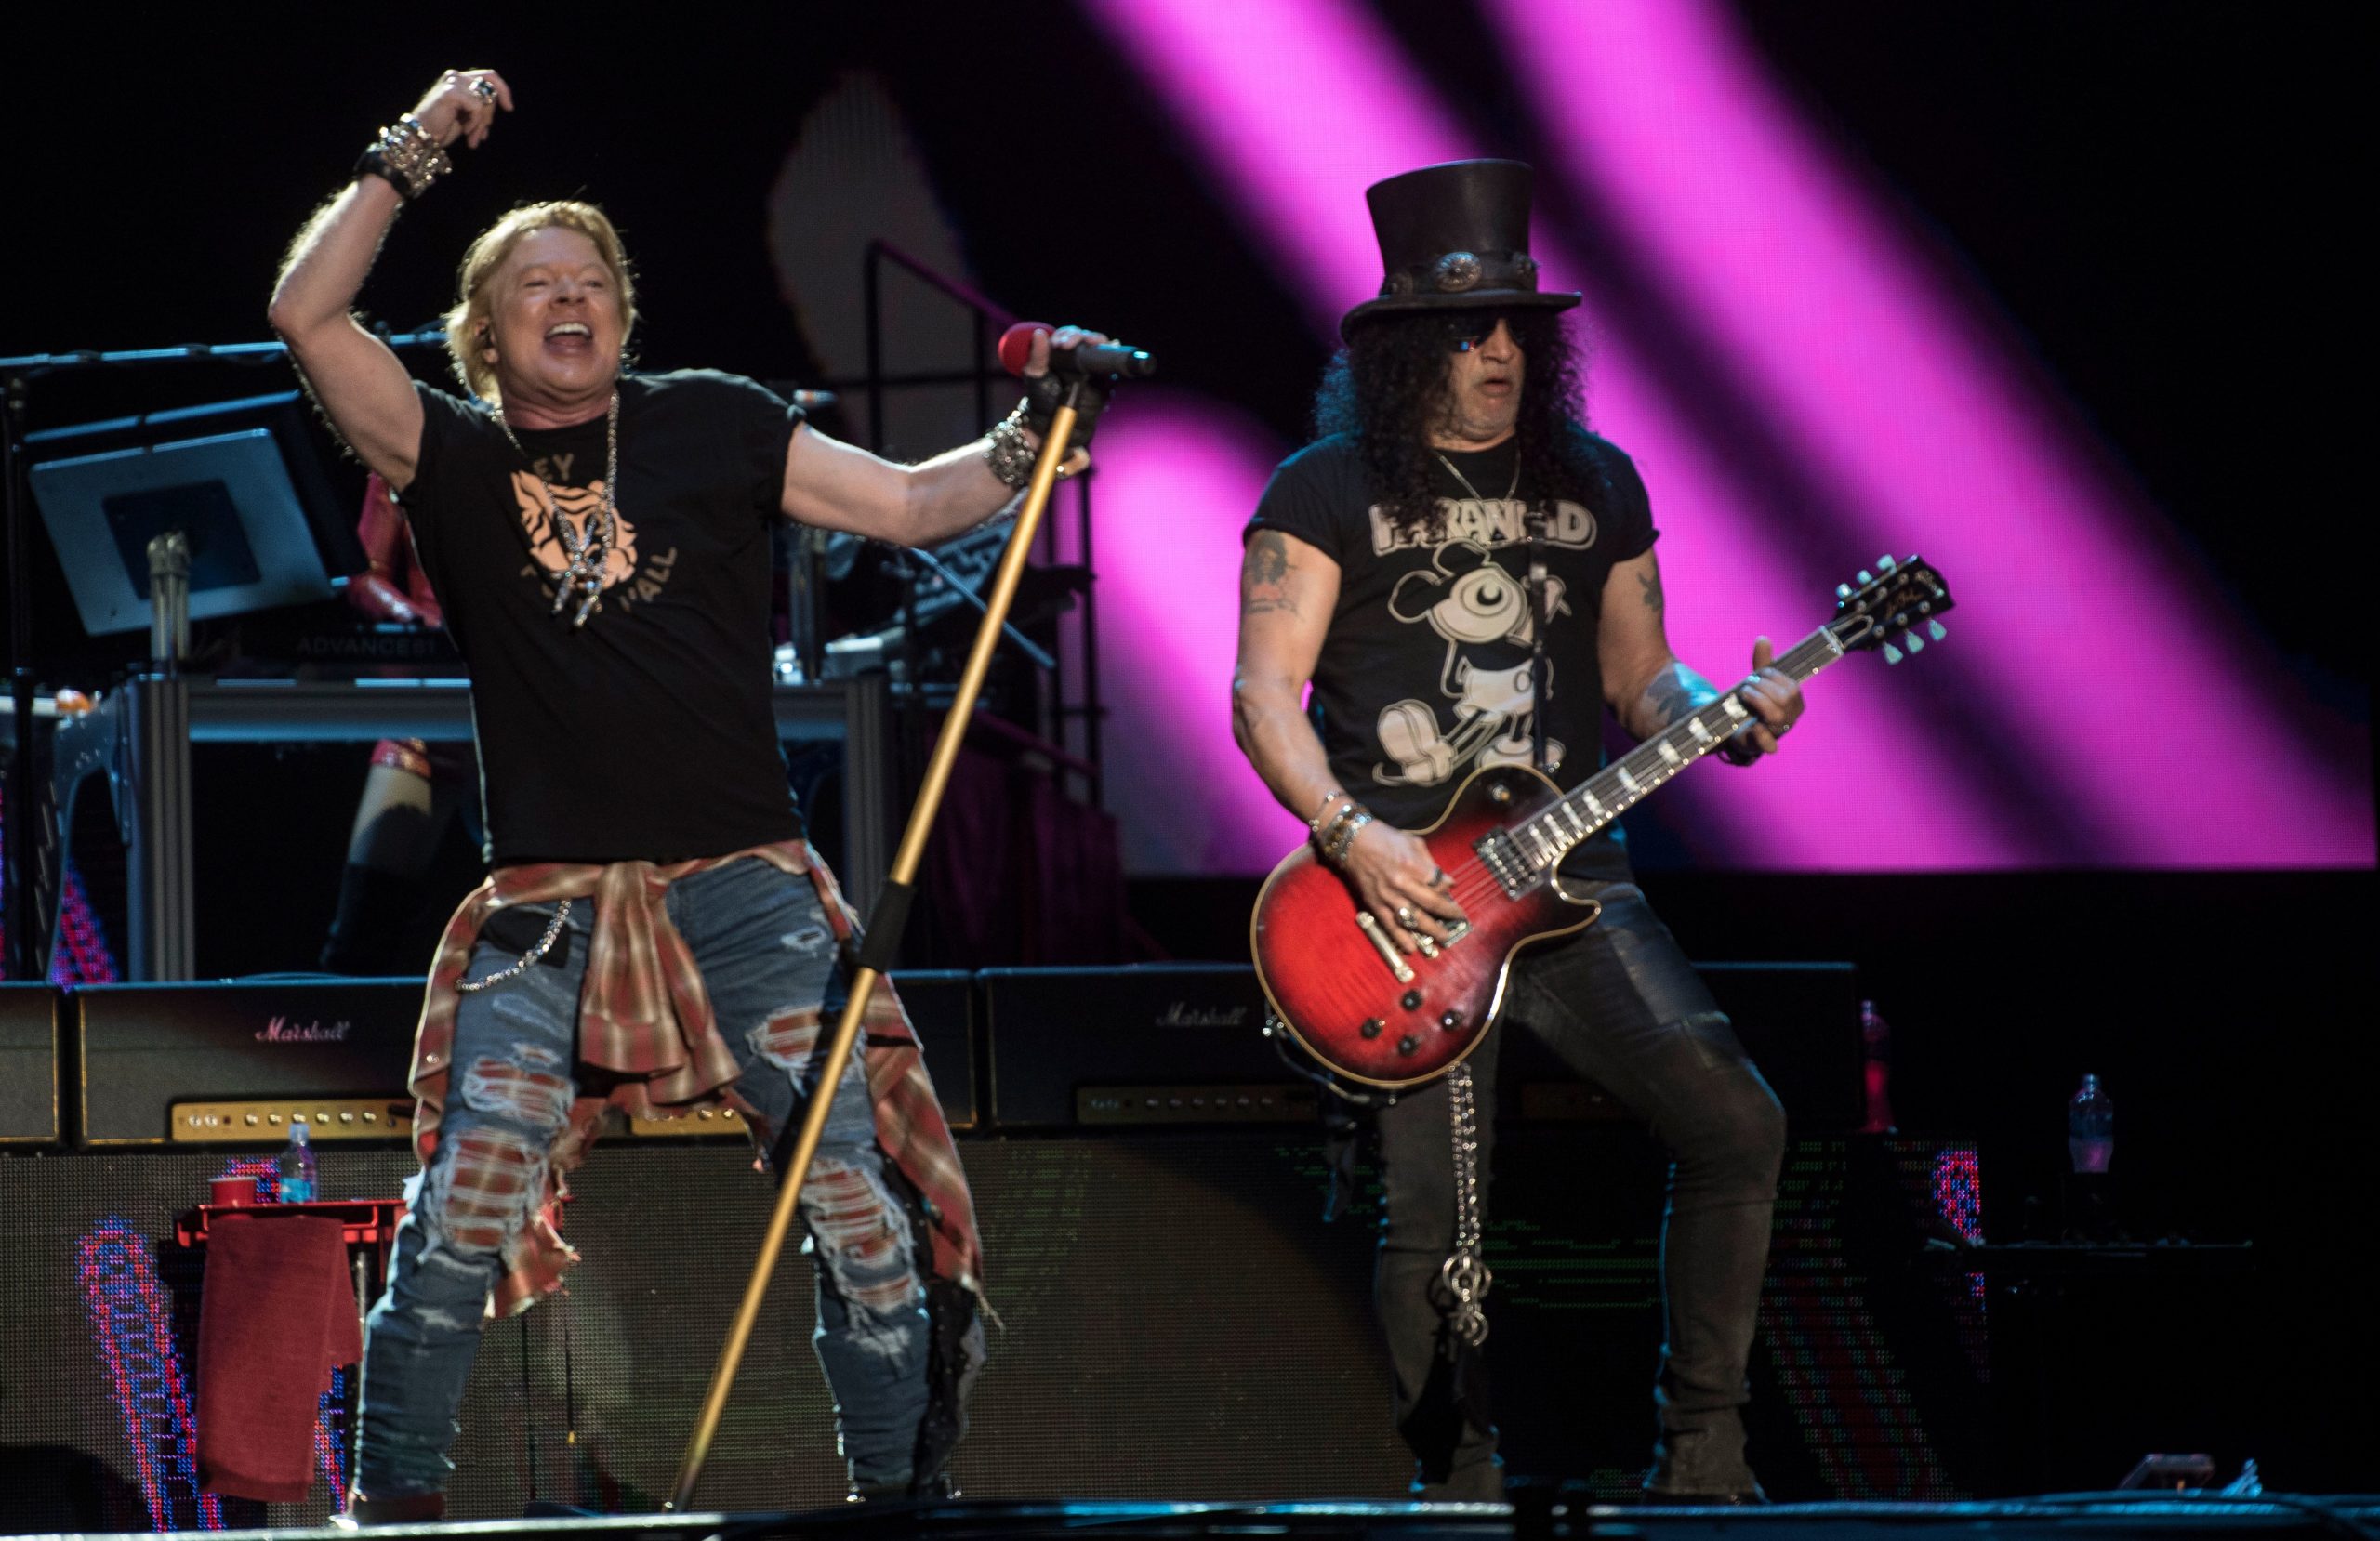 Guns N' Roses release their first new song in 13 years